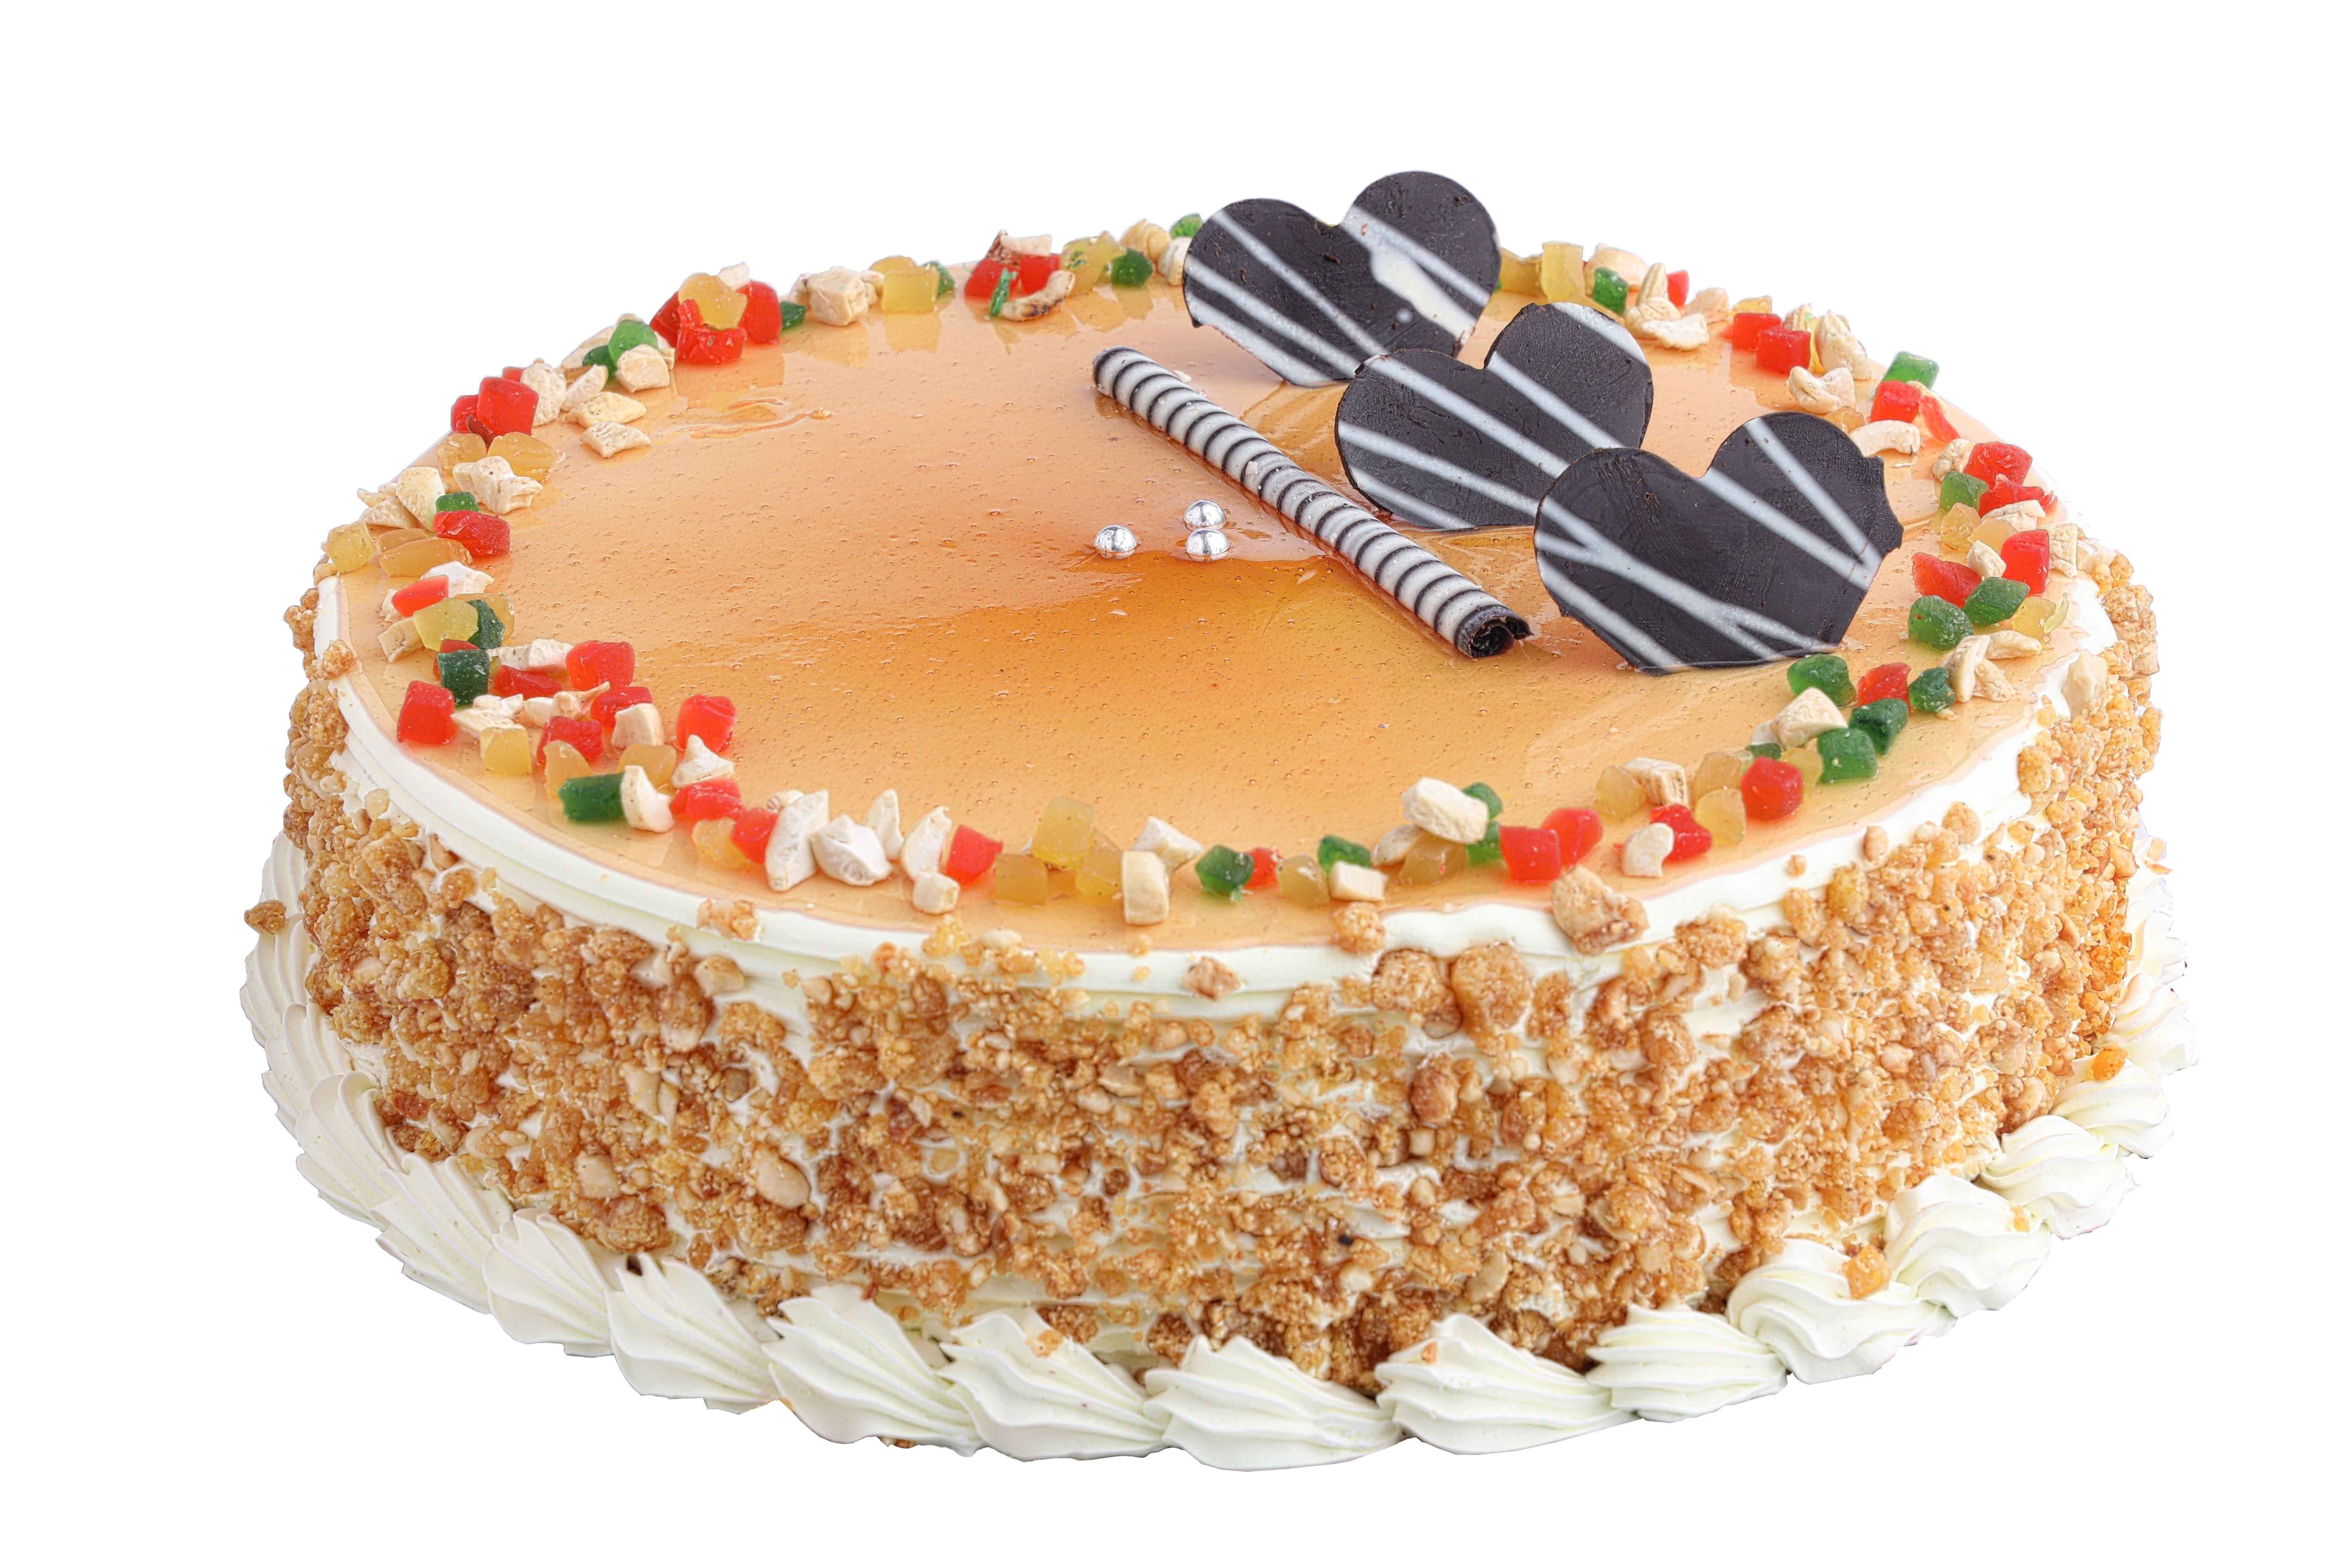 Buy Bakingo Fresh Cake - Butterscotch, Eggless Online at Best Price of Rs  null - bigbasket